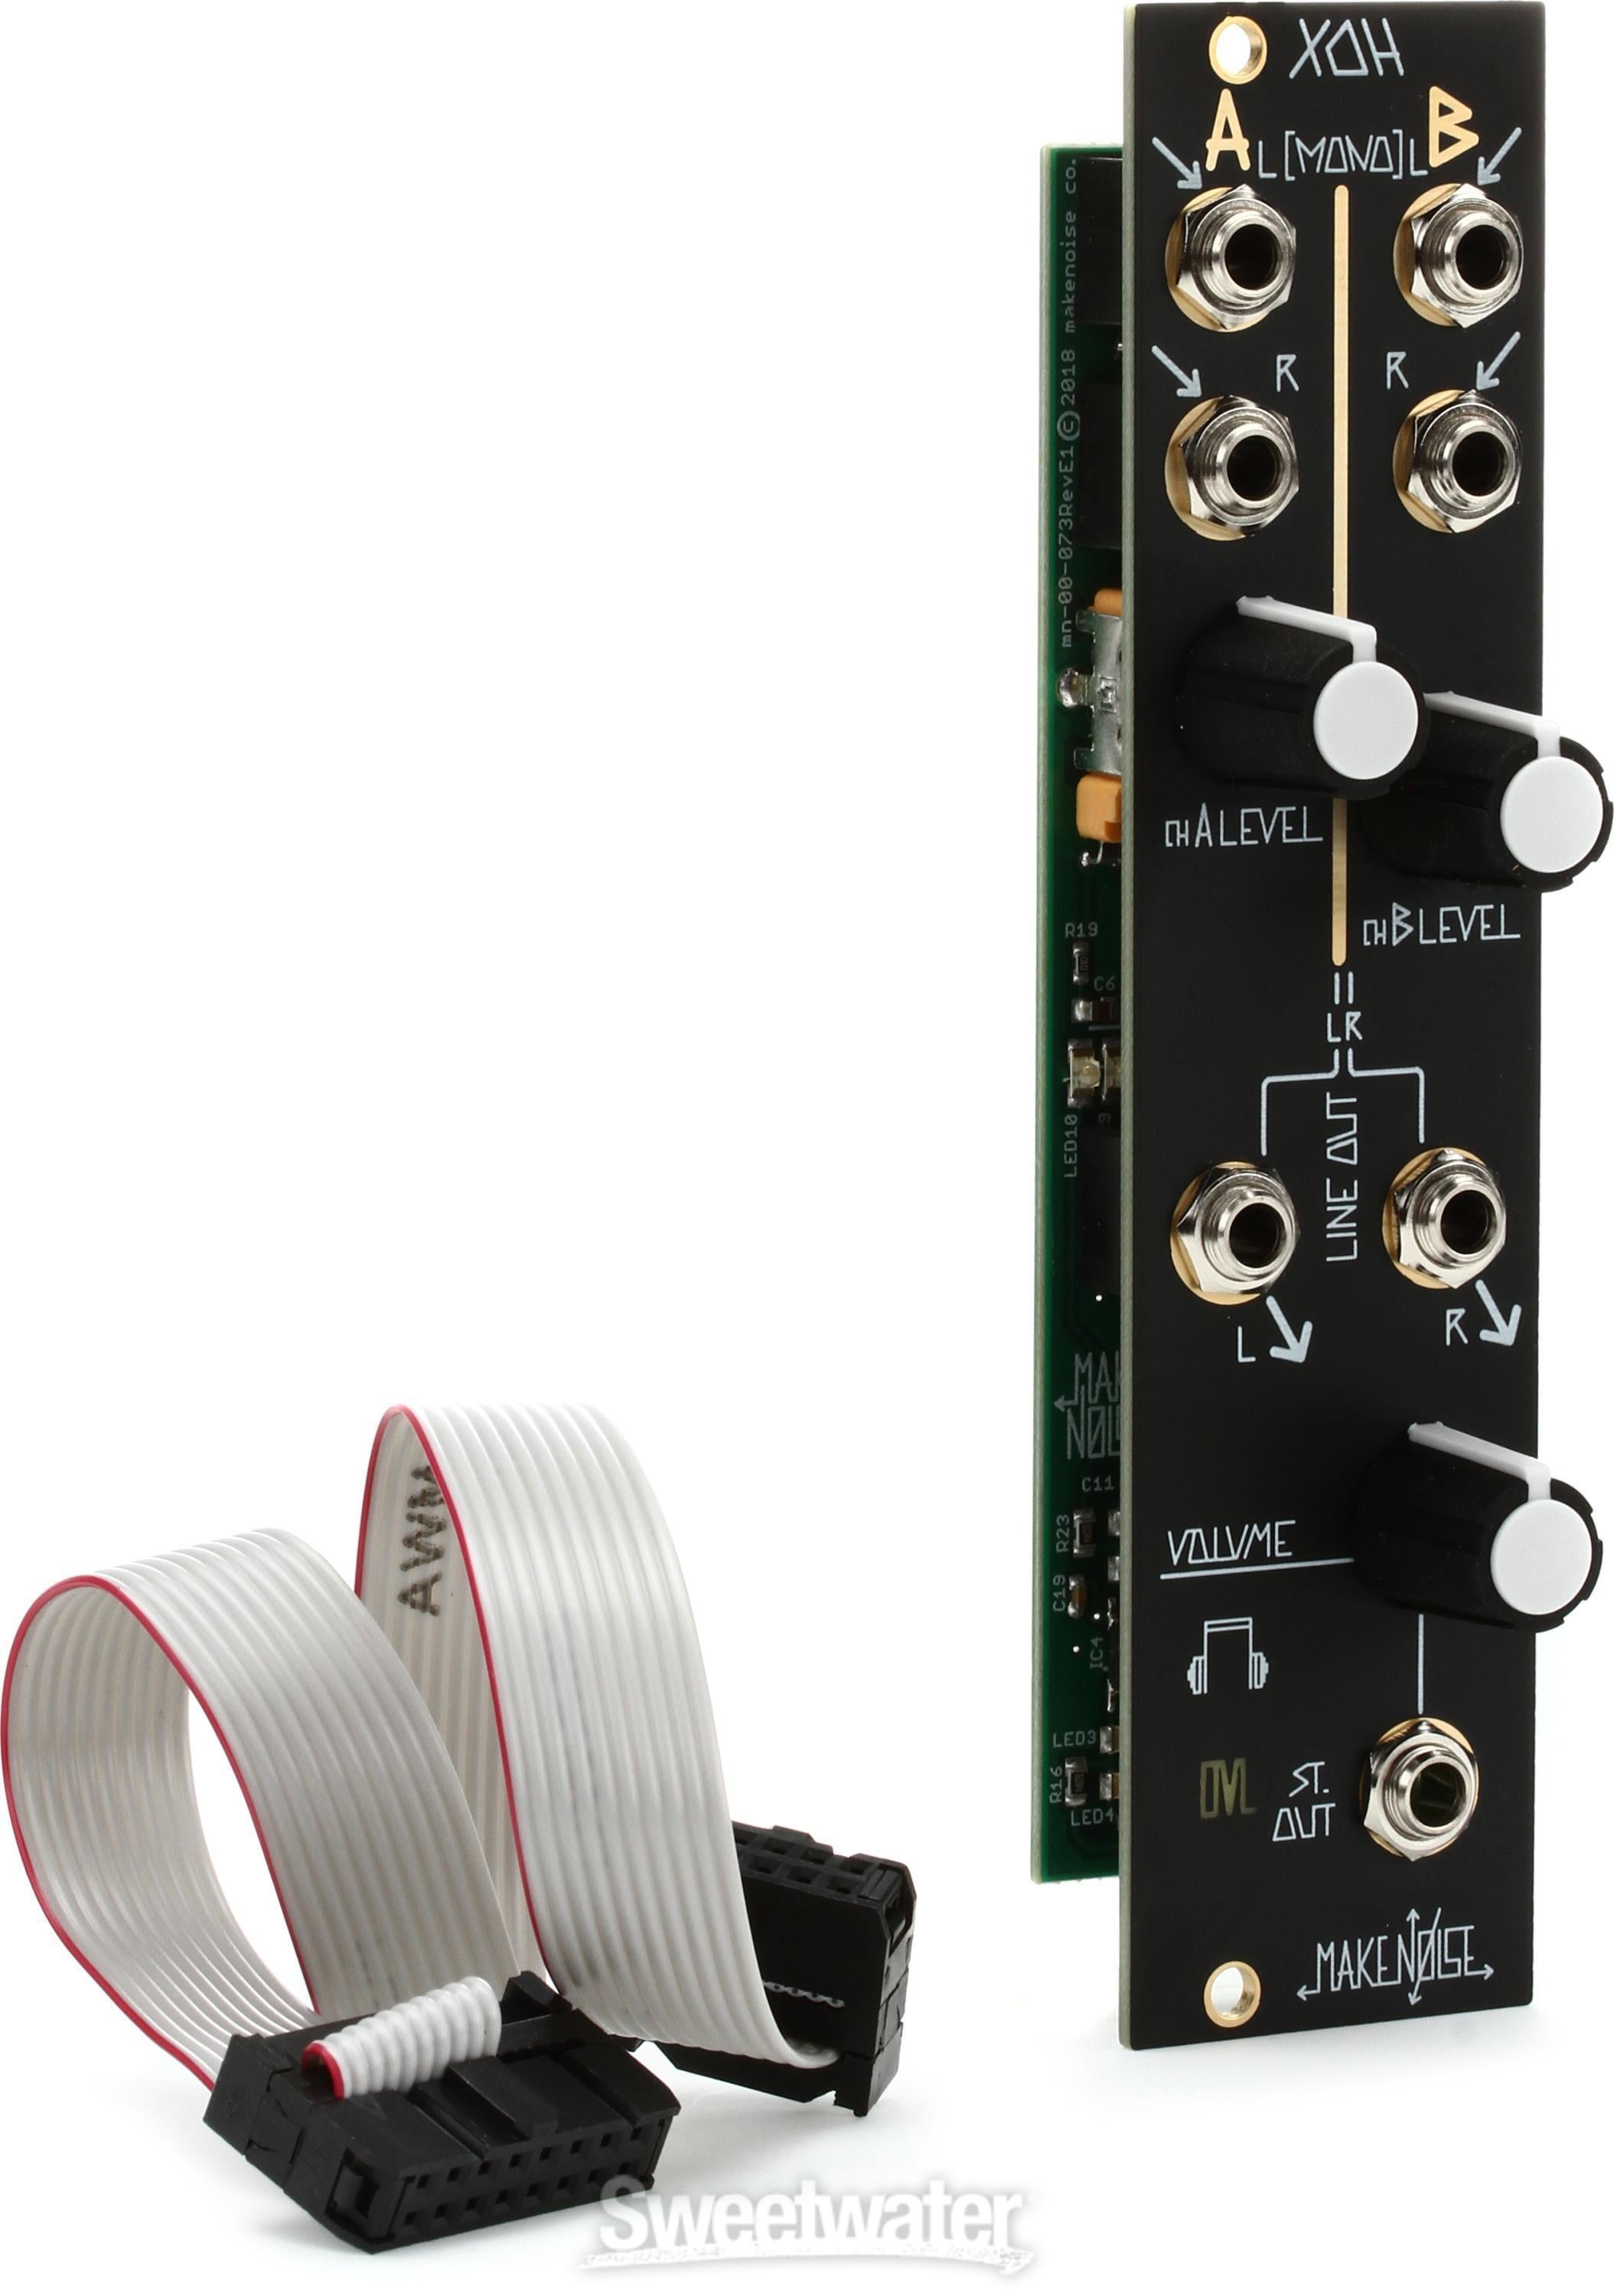 Make Noise XOH Eurorack Headphone Out Module | Sweetwater